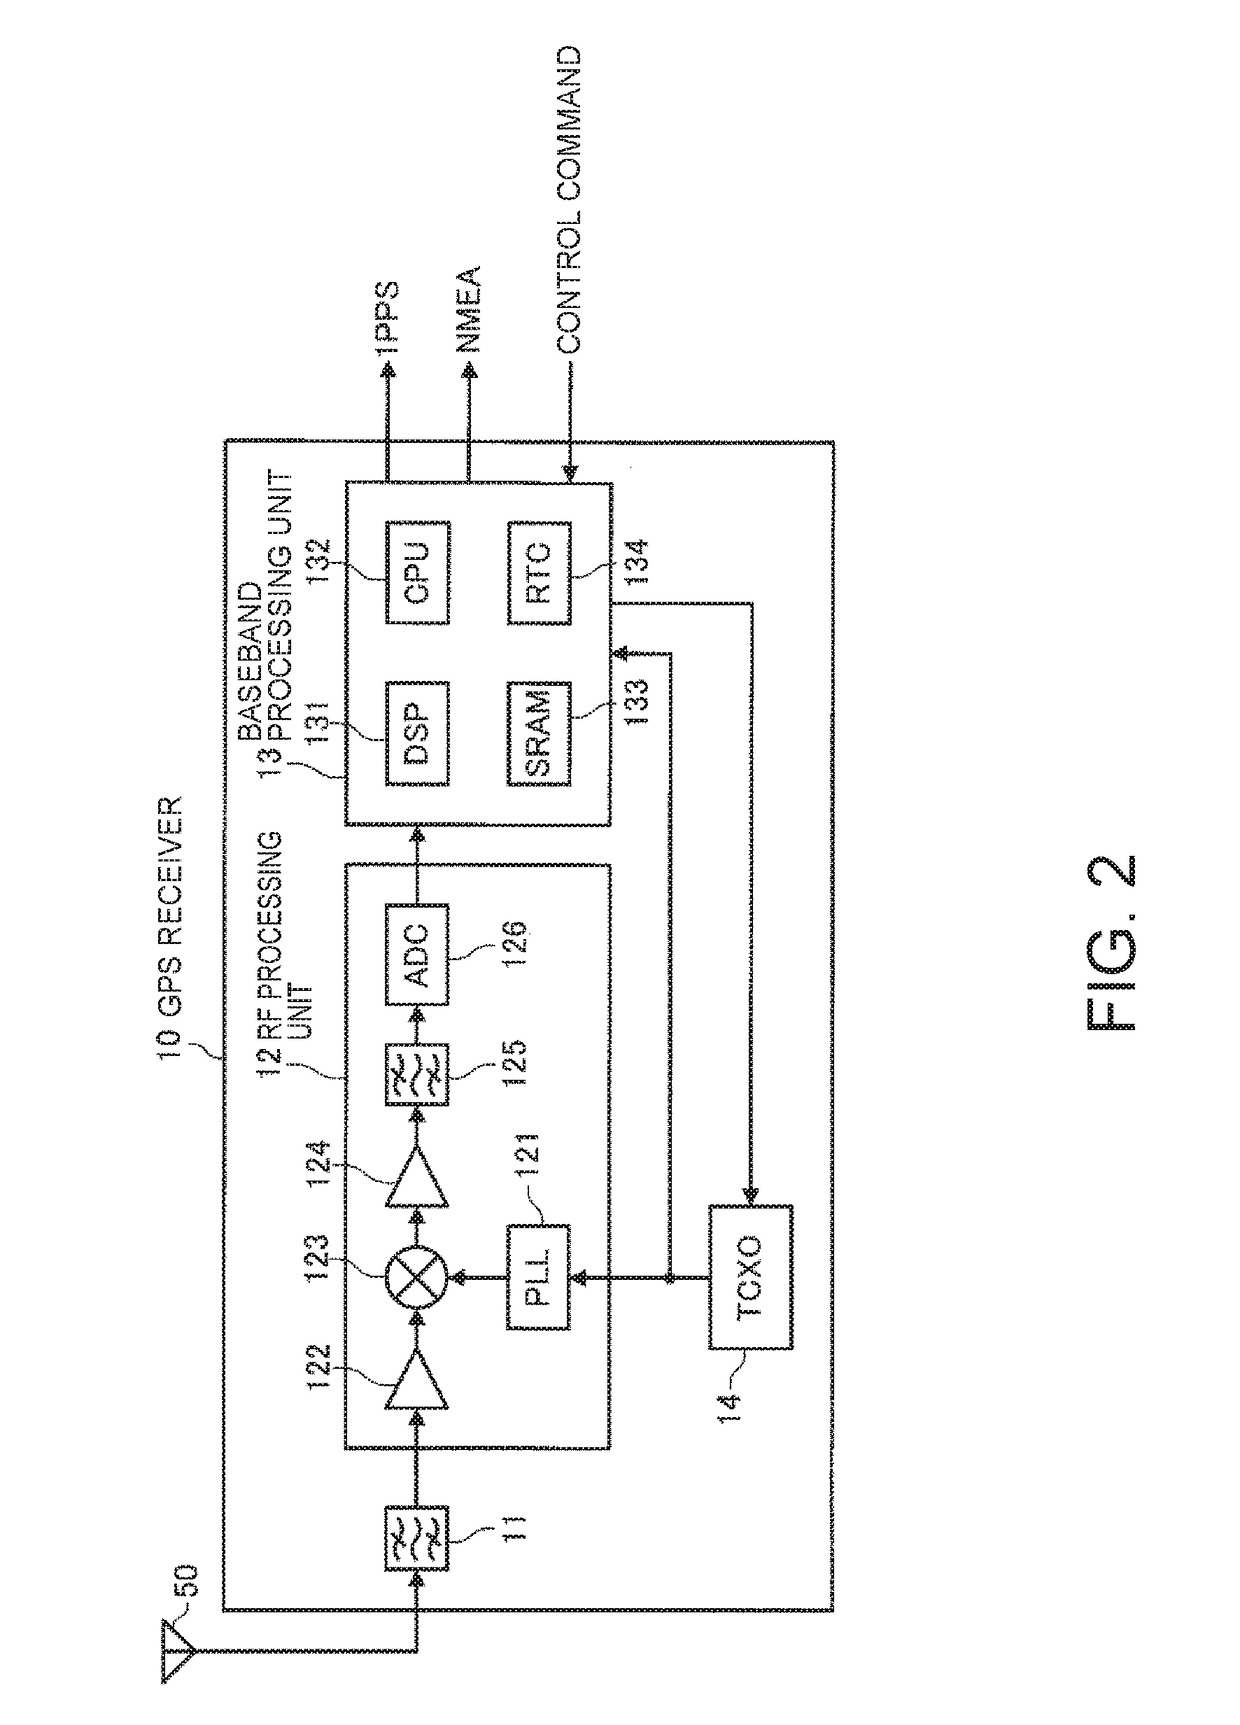 Timing signal generation device, electronic device, and moving object